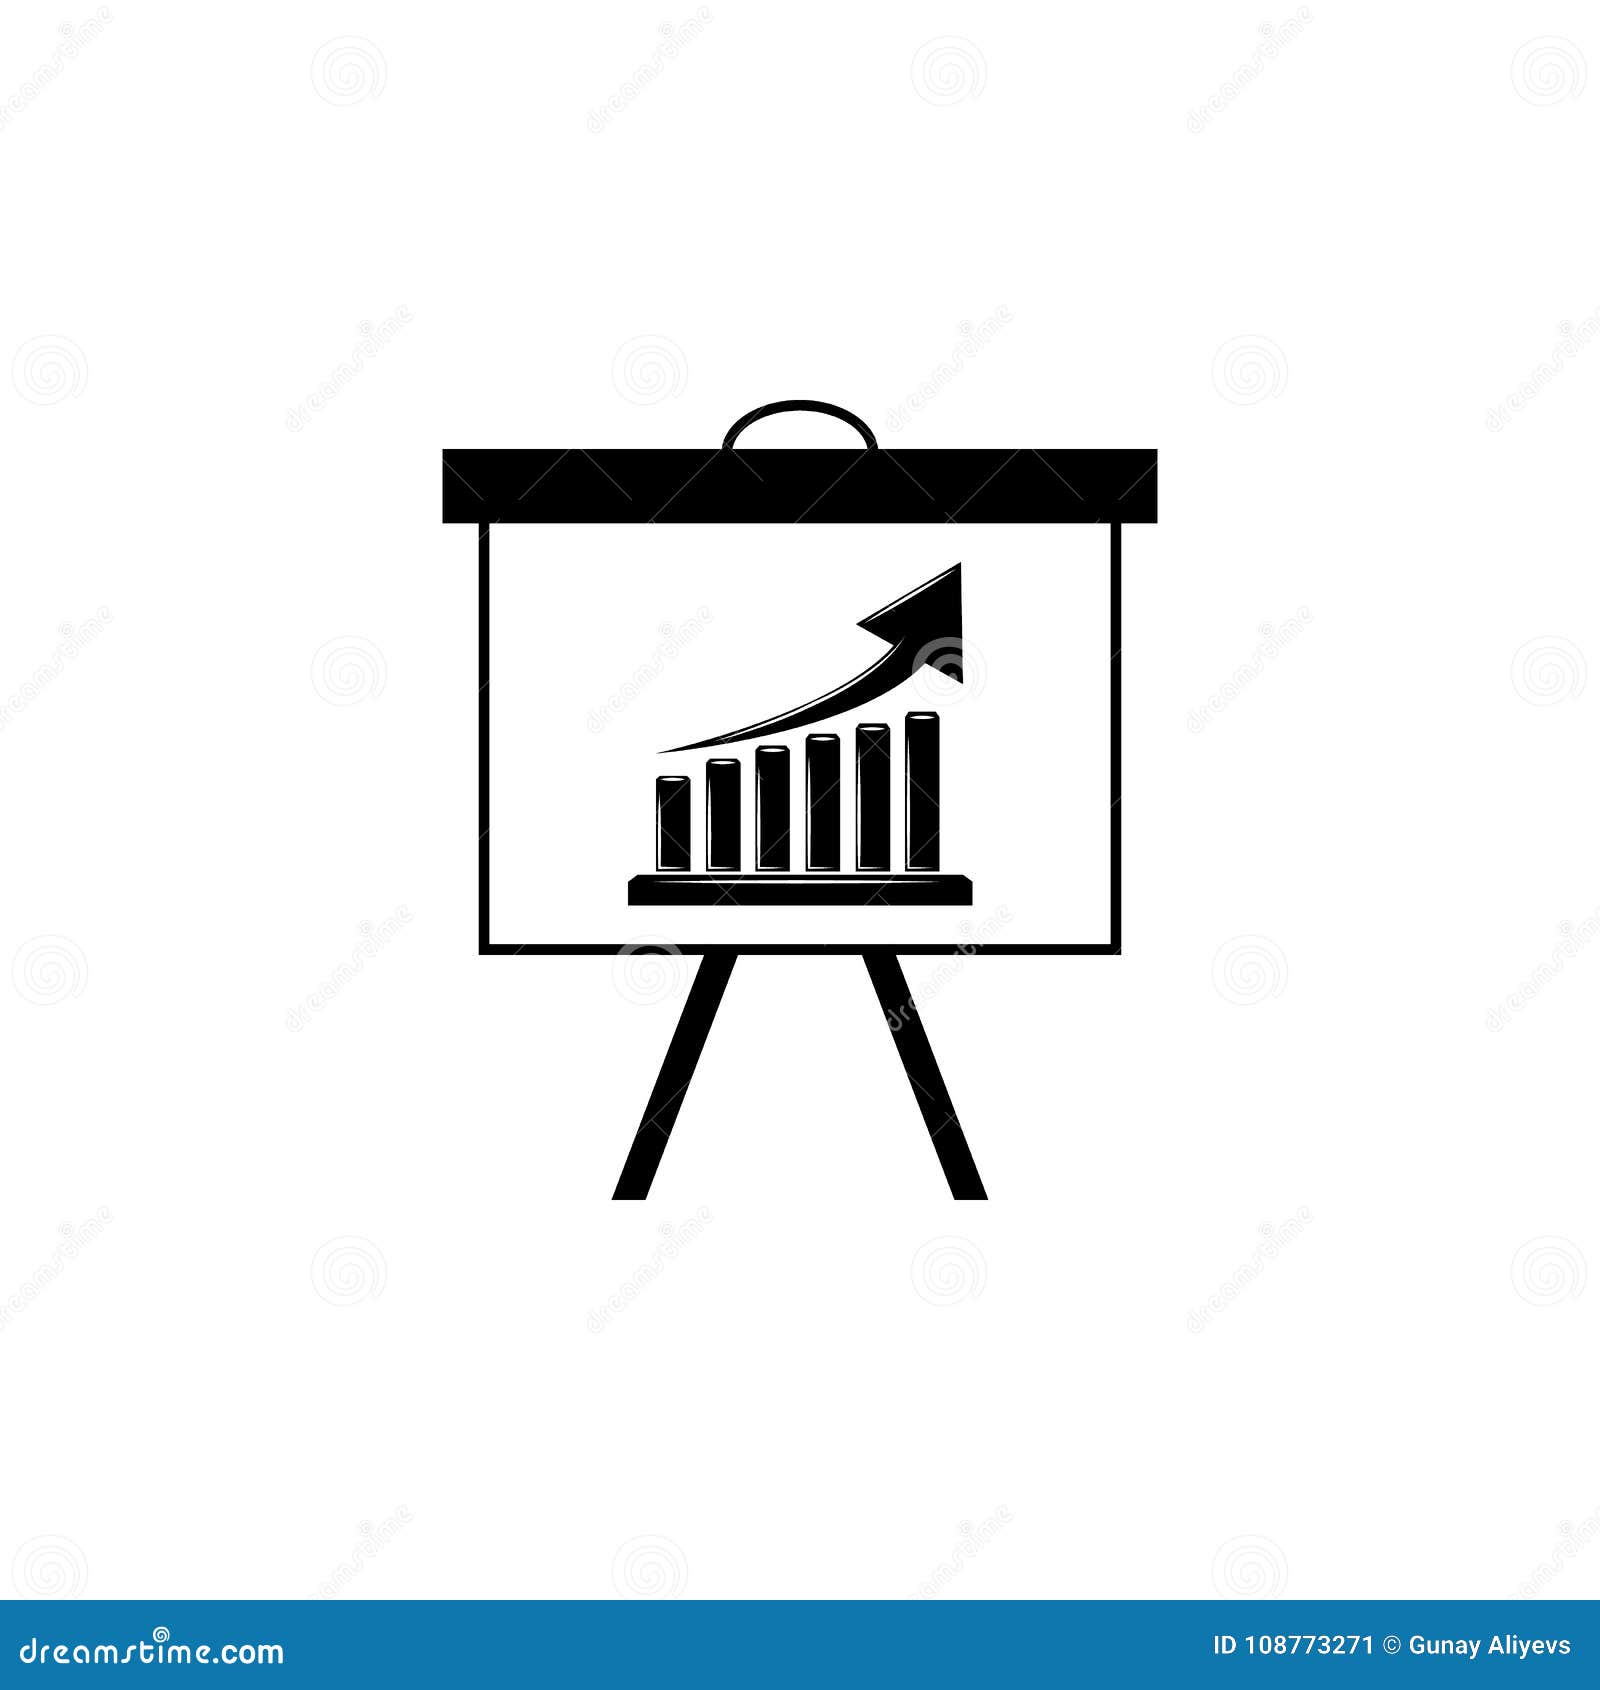 up diagramma on board icon. trend diagram  icon. business analytics concept  icon. signs and s icon for website